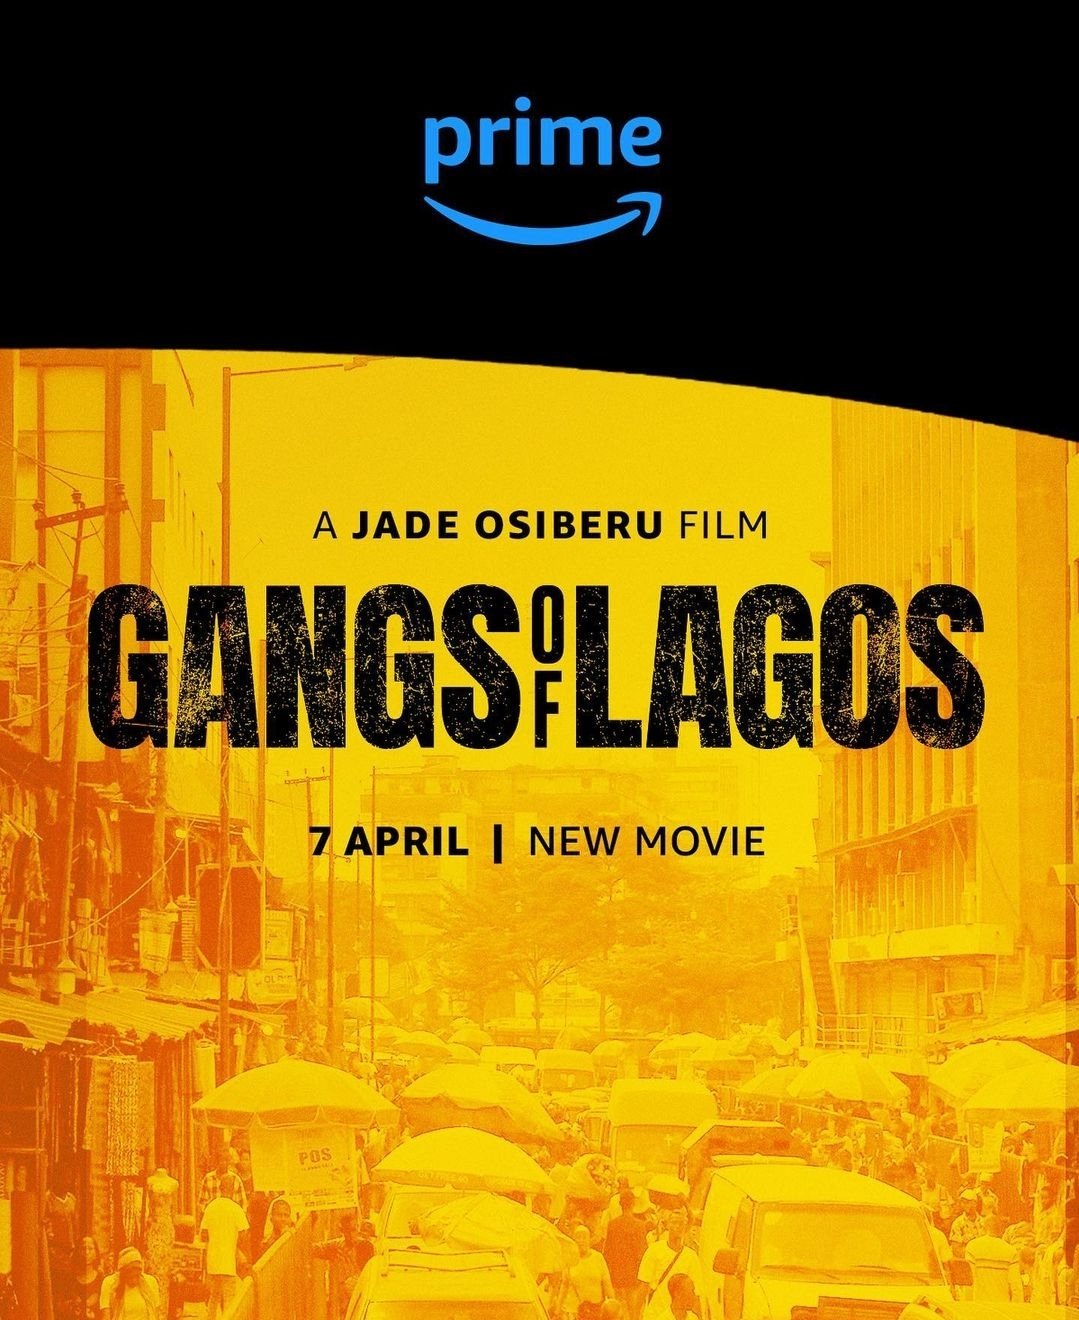 Prime Video Launches First African Original Movie, "Gangs of Lagos"